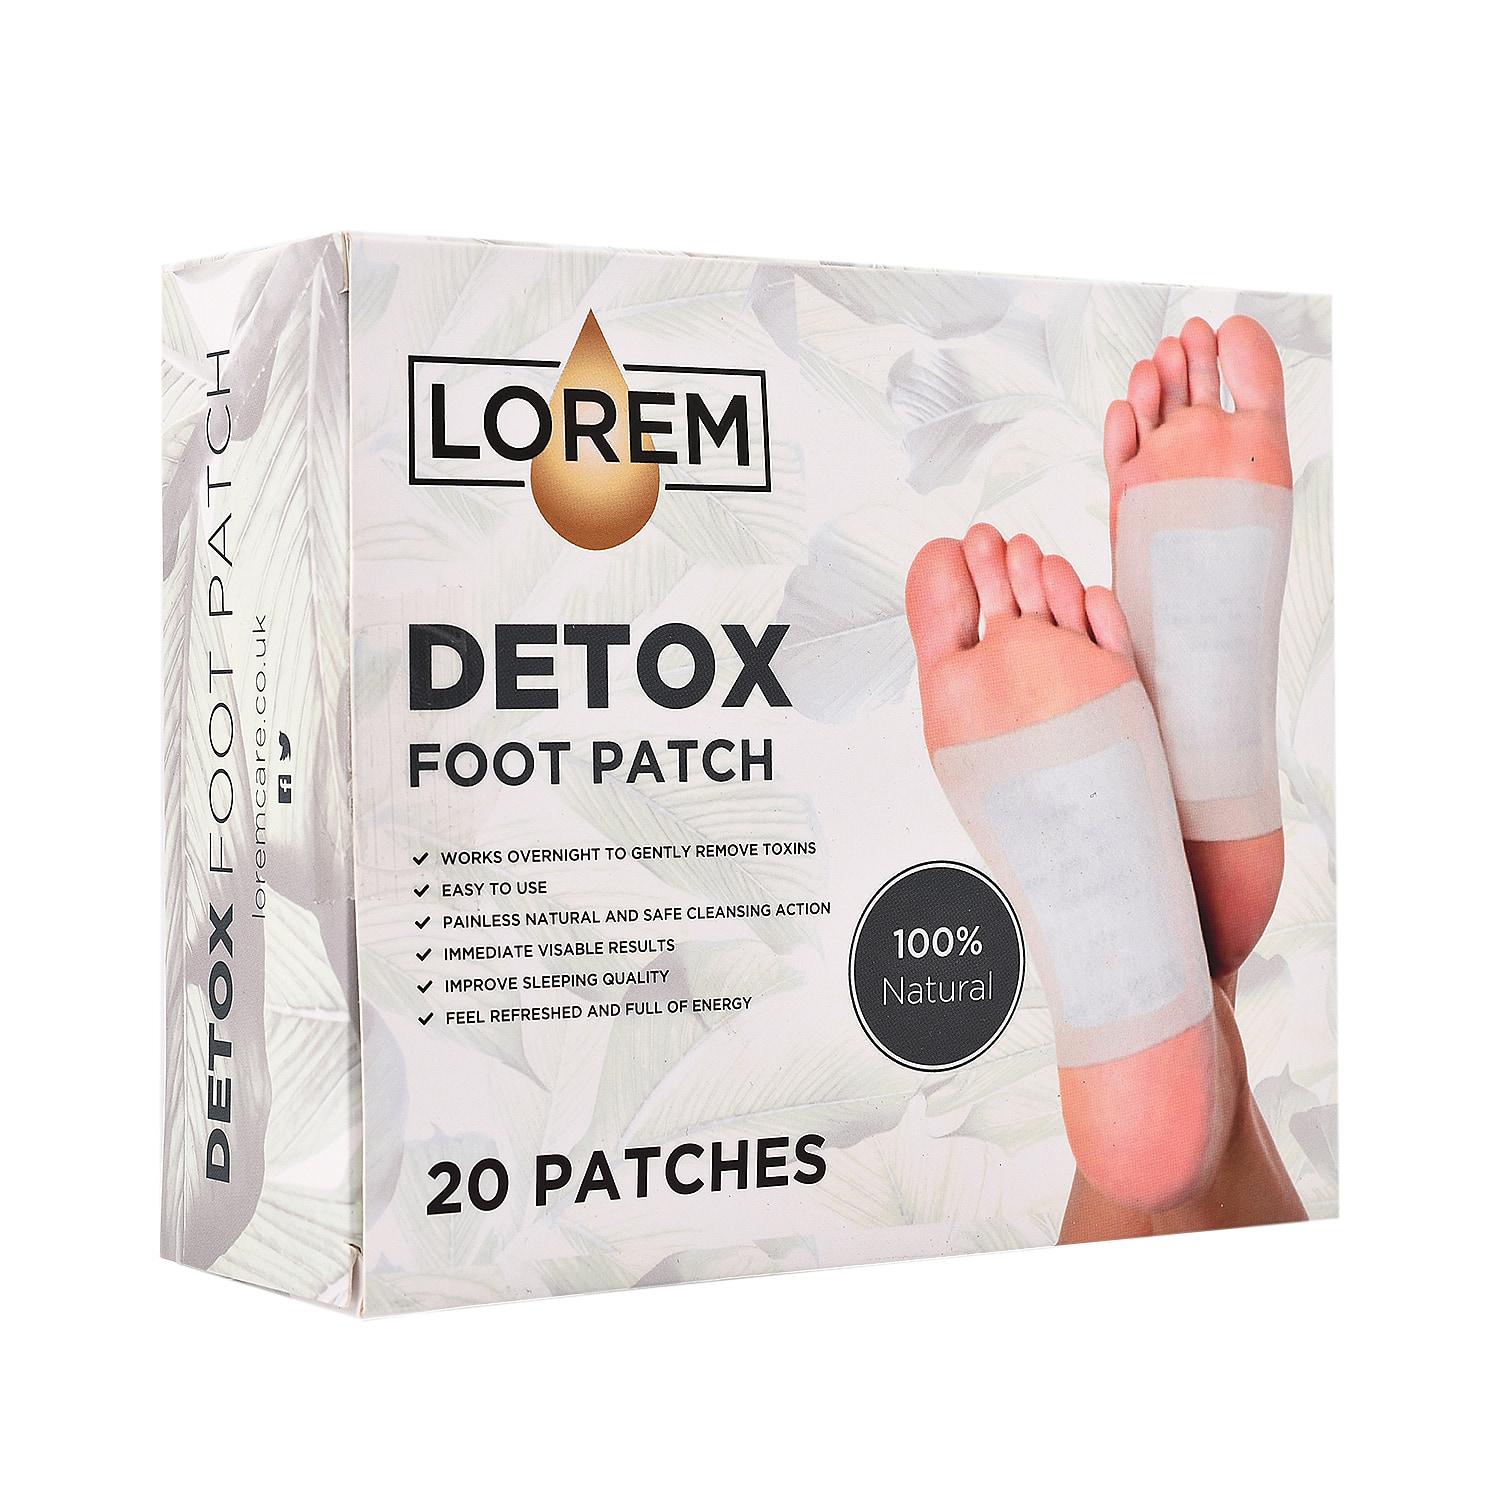 Lorem Detox Foot Patches - Pack of 20